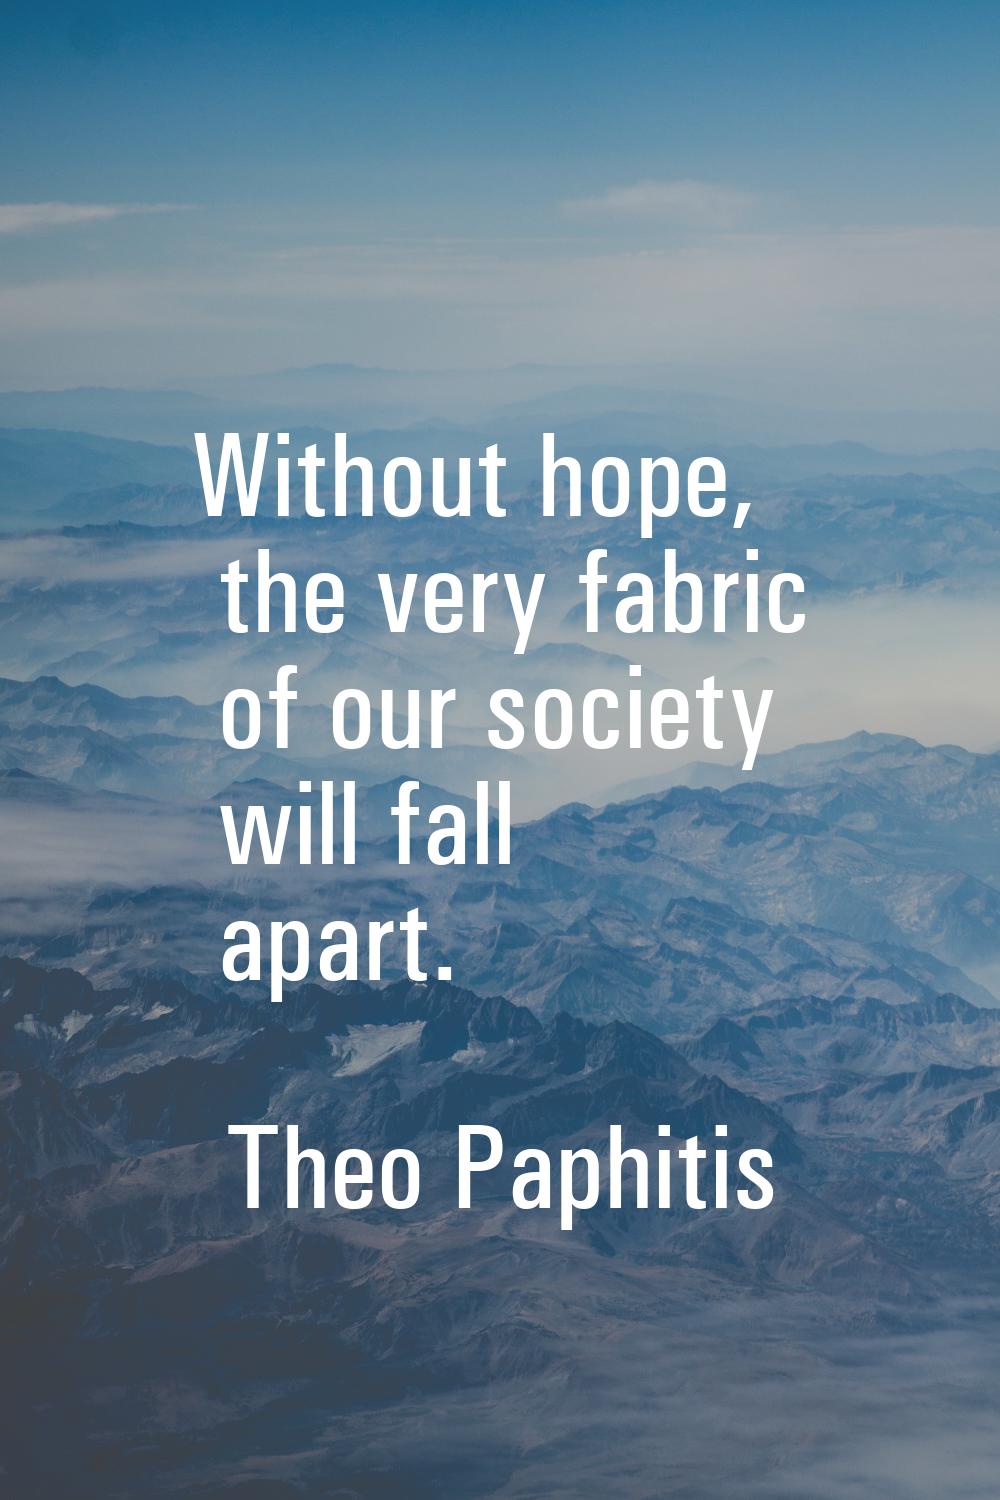 Without hope, the very fabric of our society will fall apart.